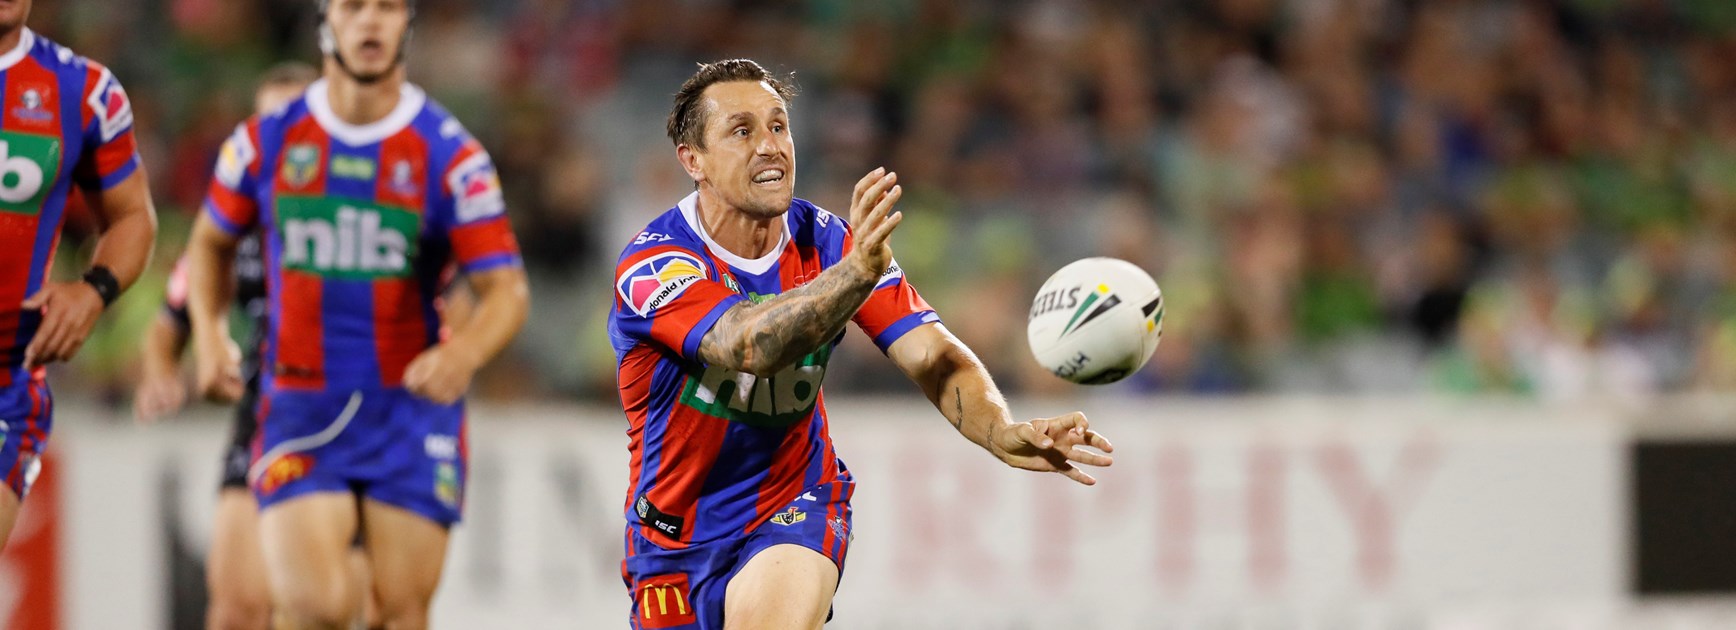 Knights halfback Mitchell Pearce in action.